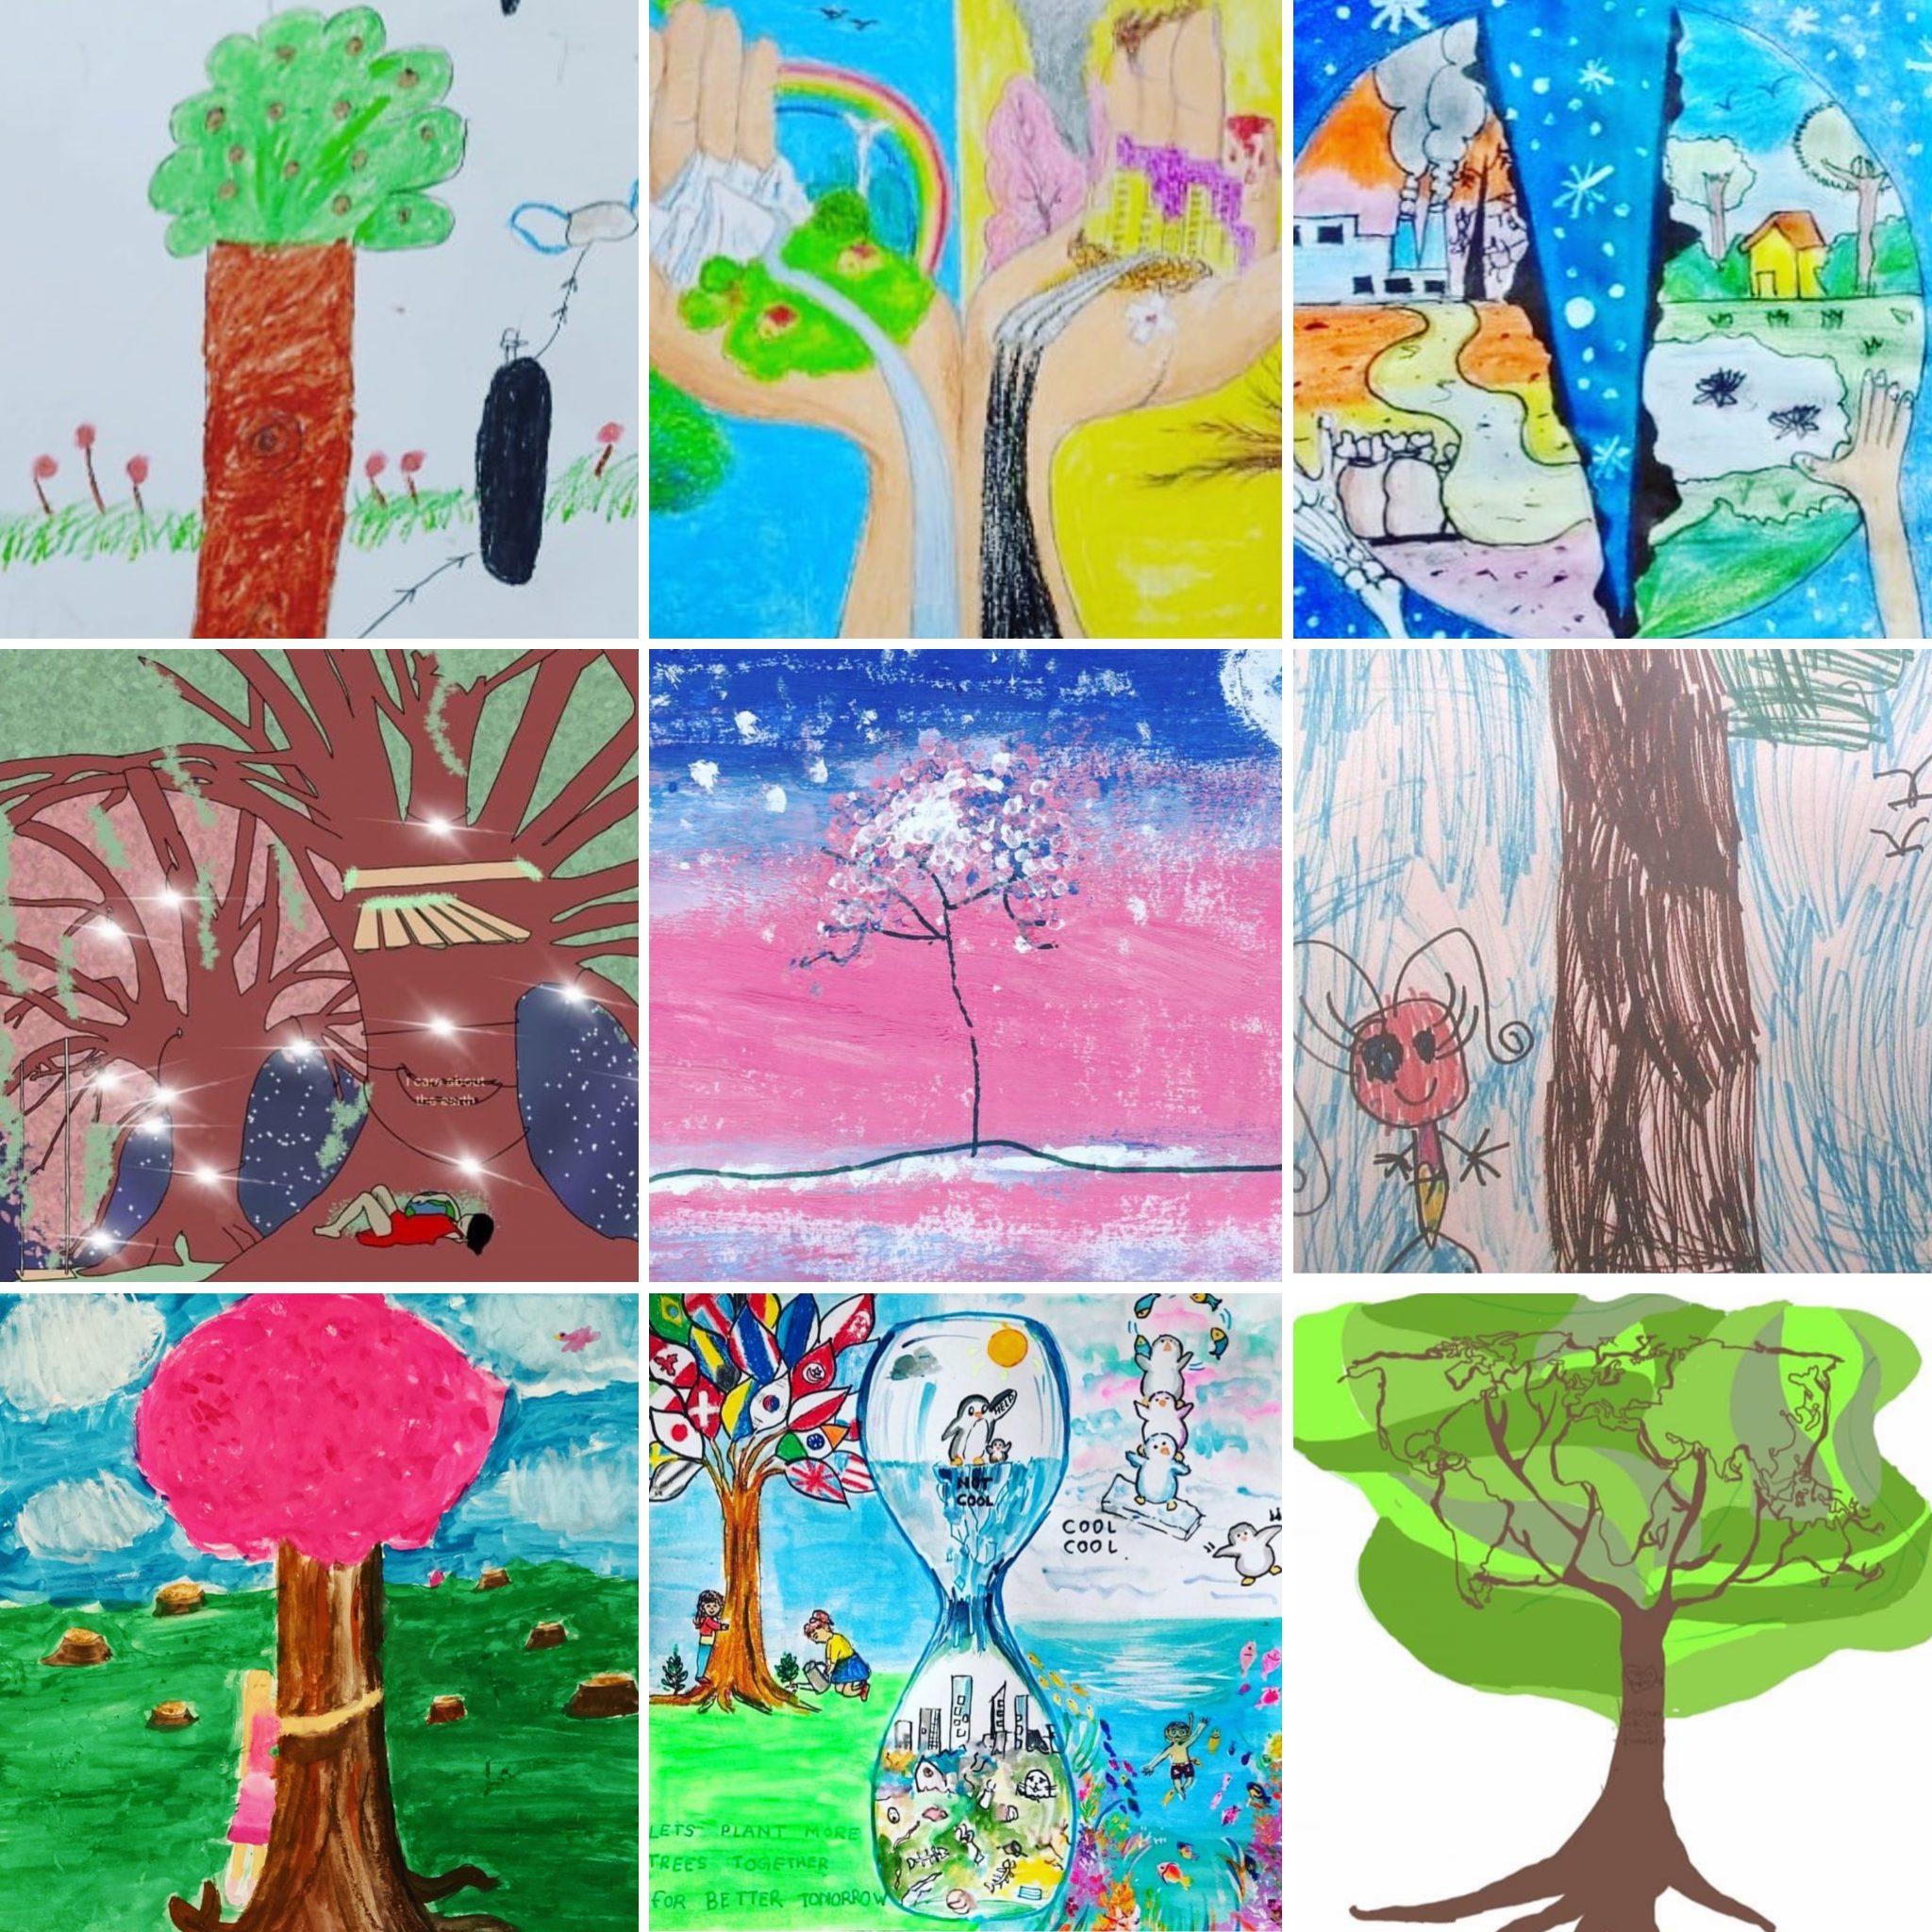 Gallery - PRP Drawing Competition | Pacific Resilience Partnership